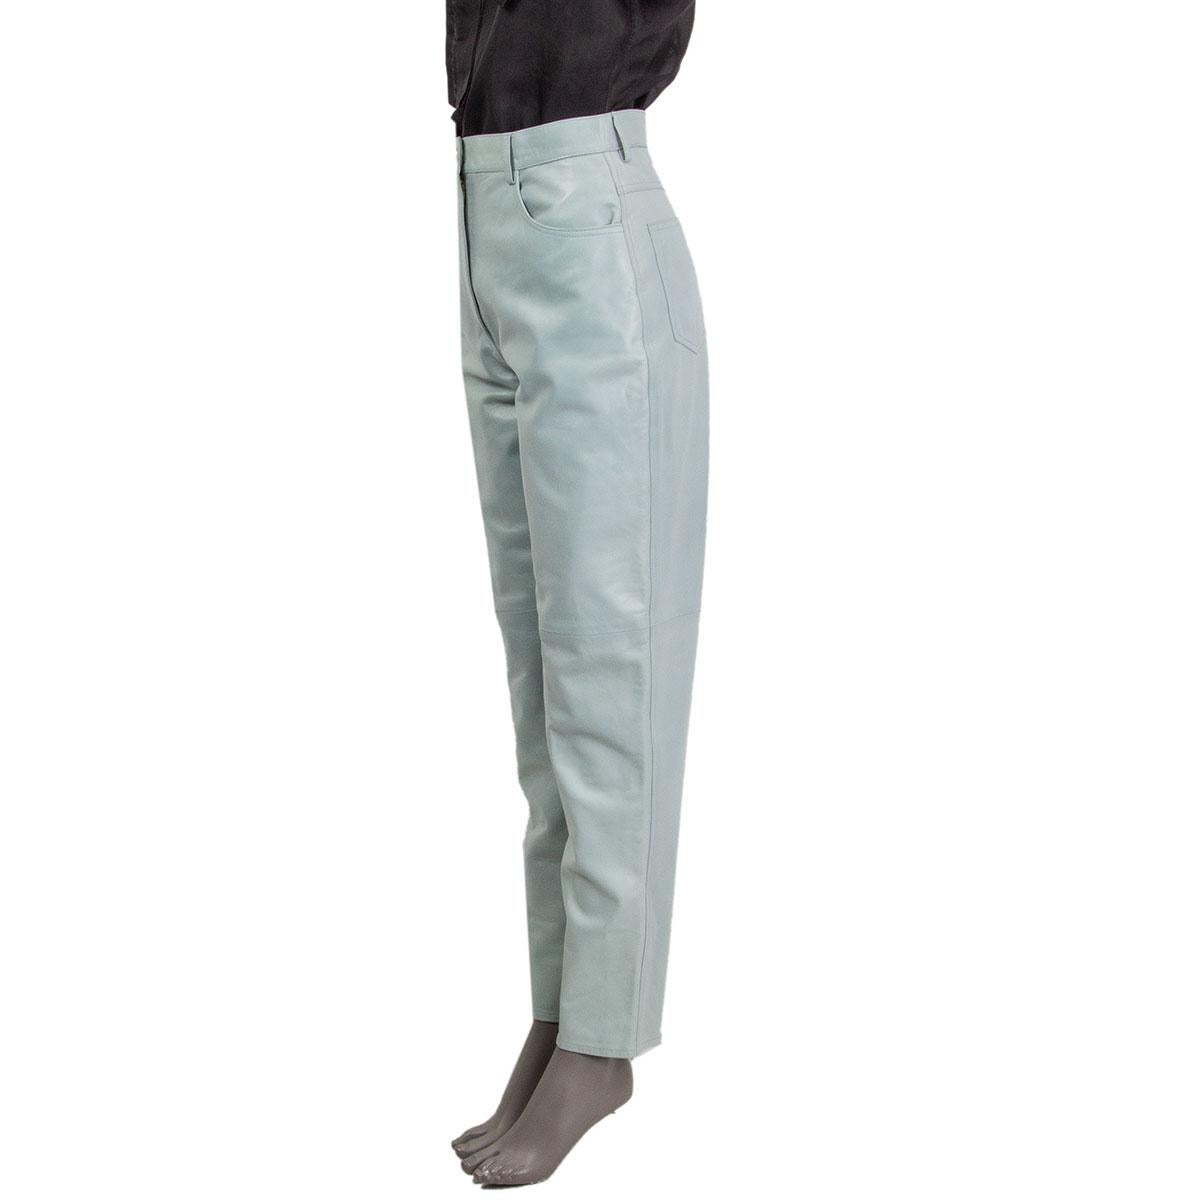 100% authentic Gucci tapered leather pant in pale blue leather (100%) with a high rise, five-pocktes and belt loops. Lined in pale blue  fabric. Closes with a zipper and button in the front. Has been worn and is excellent condition.

Tag